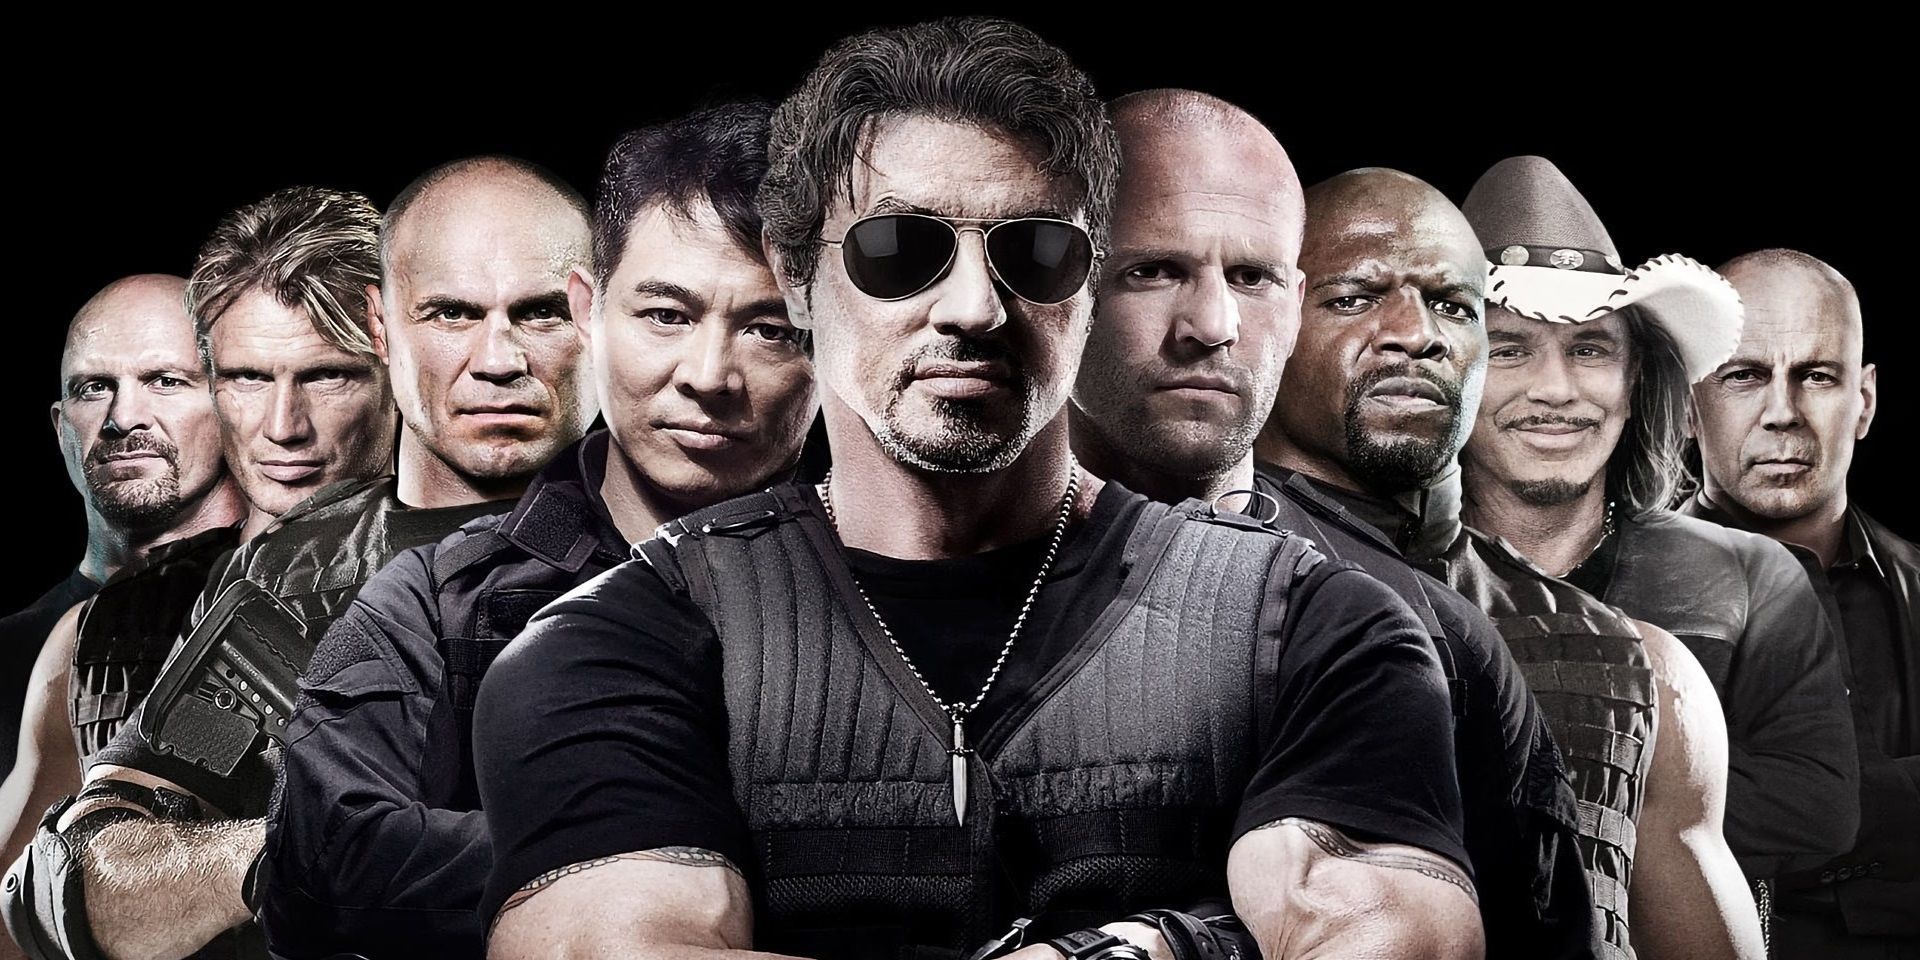 The cast of The Expendables on the poster